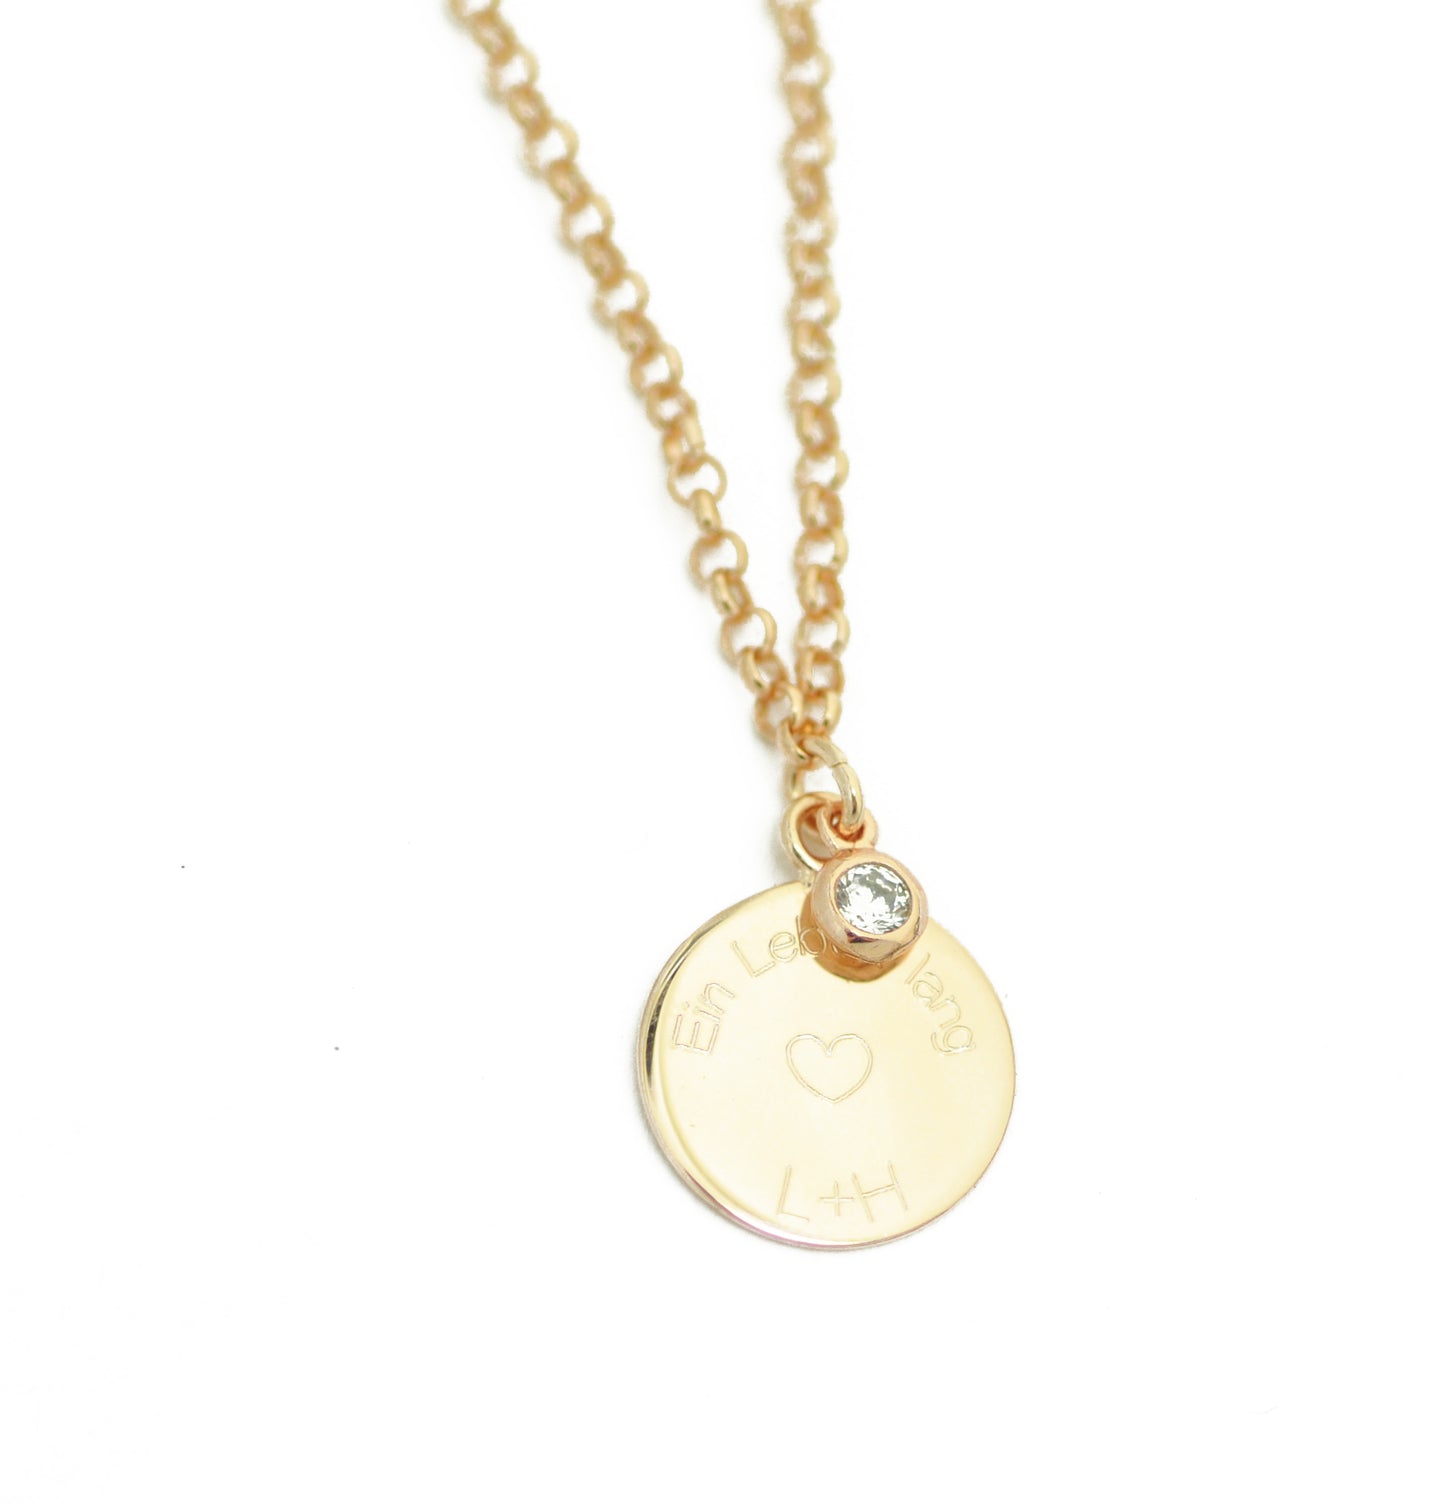 Necklace with personal engraving &amp; zirconia / 925 silver 18k gold plated / pea chain